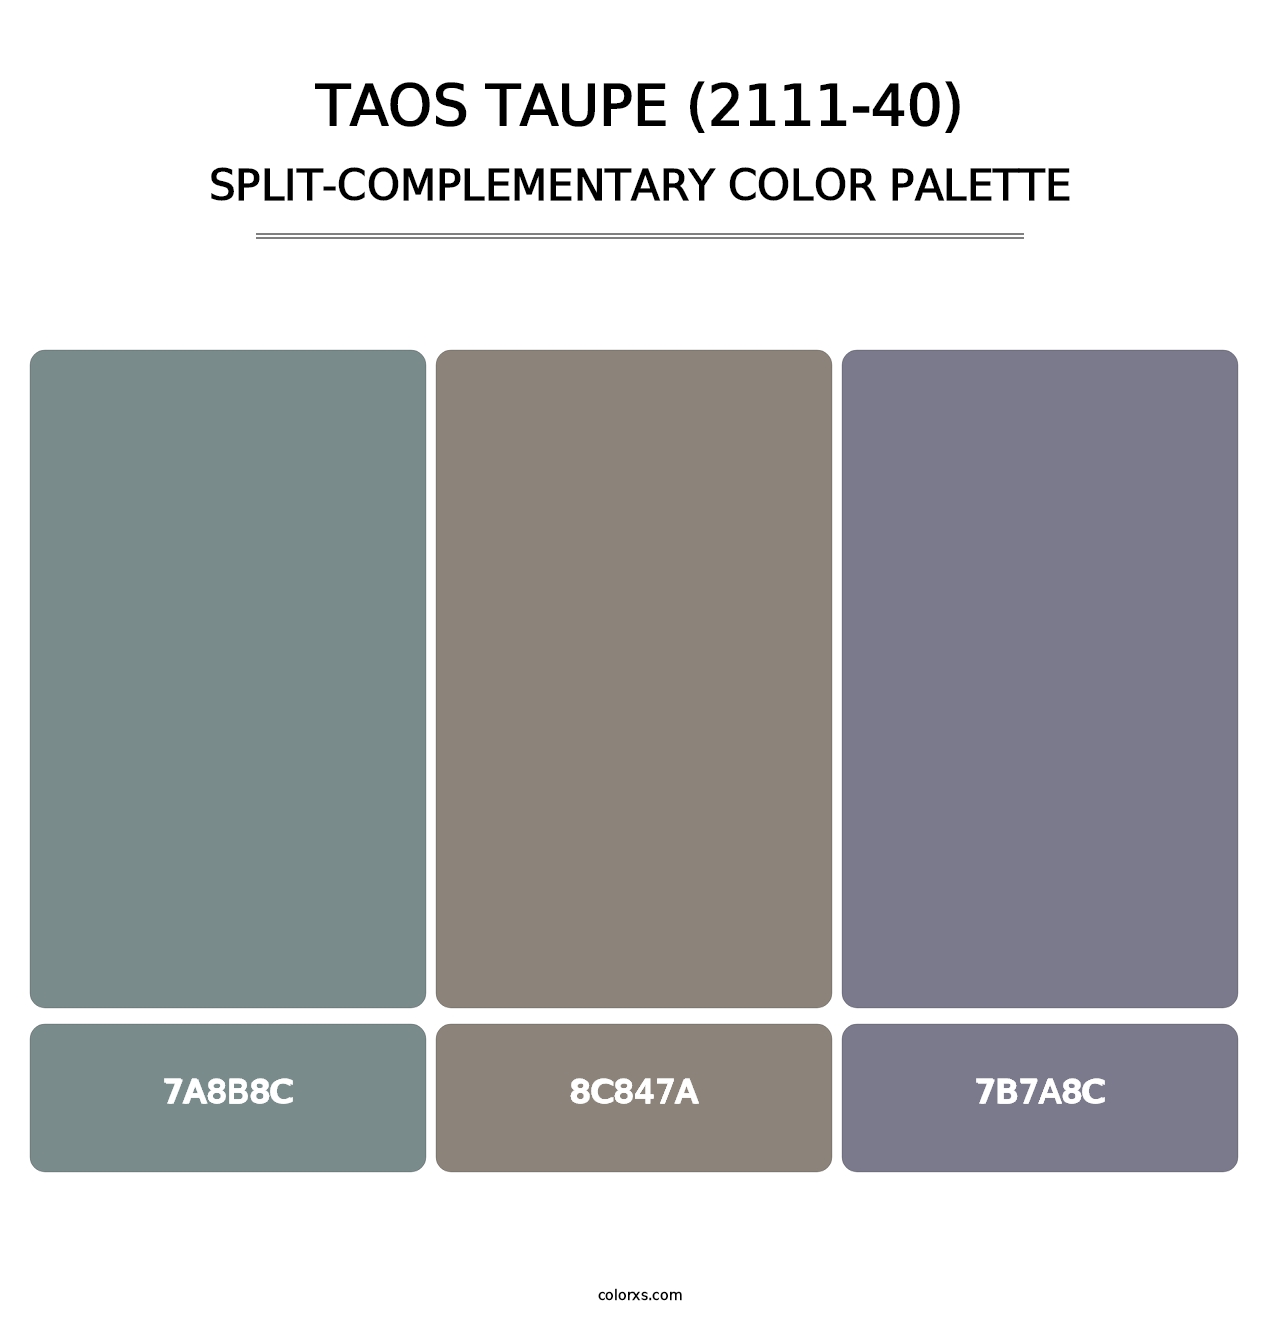 Taos Taupe (2111-40) - Split-Complementary Color Palette